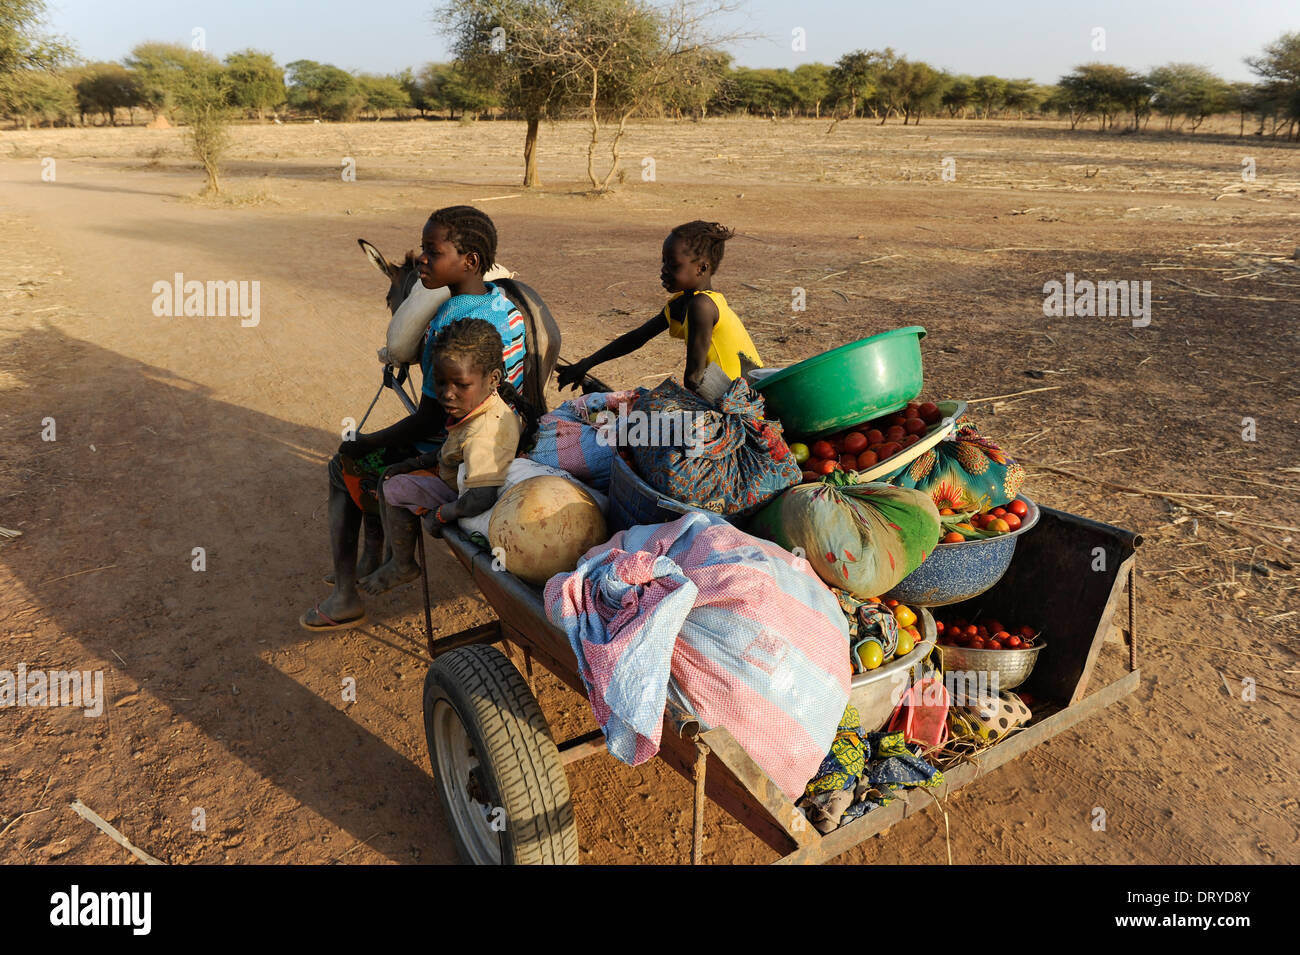 BURKINA FASO Kaya, children transport vegetables with donkey cart from farm to market, donkeys are a target by Chinese buyers for export to produce gelantin from donkey skin to extract Ejiao for Traditional Chinese Medicine TCM Stock Photo